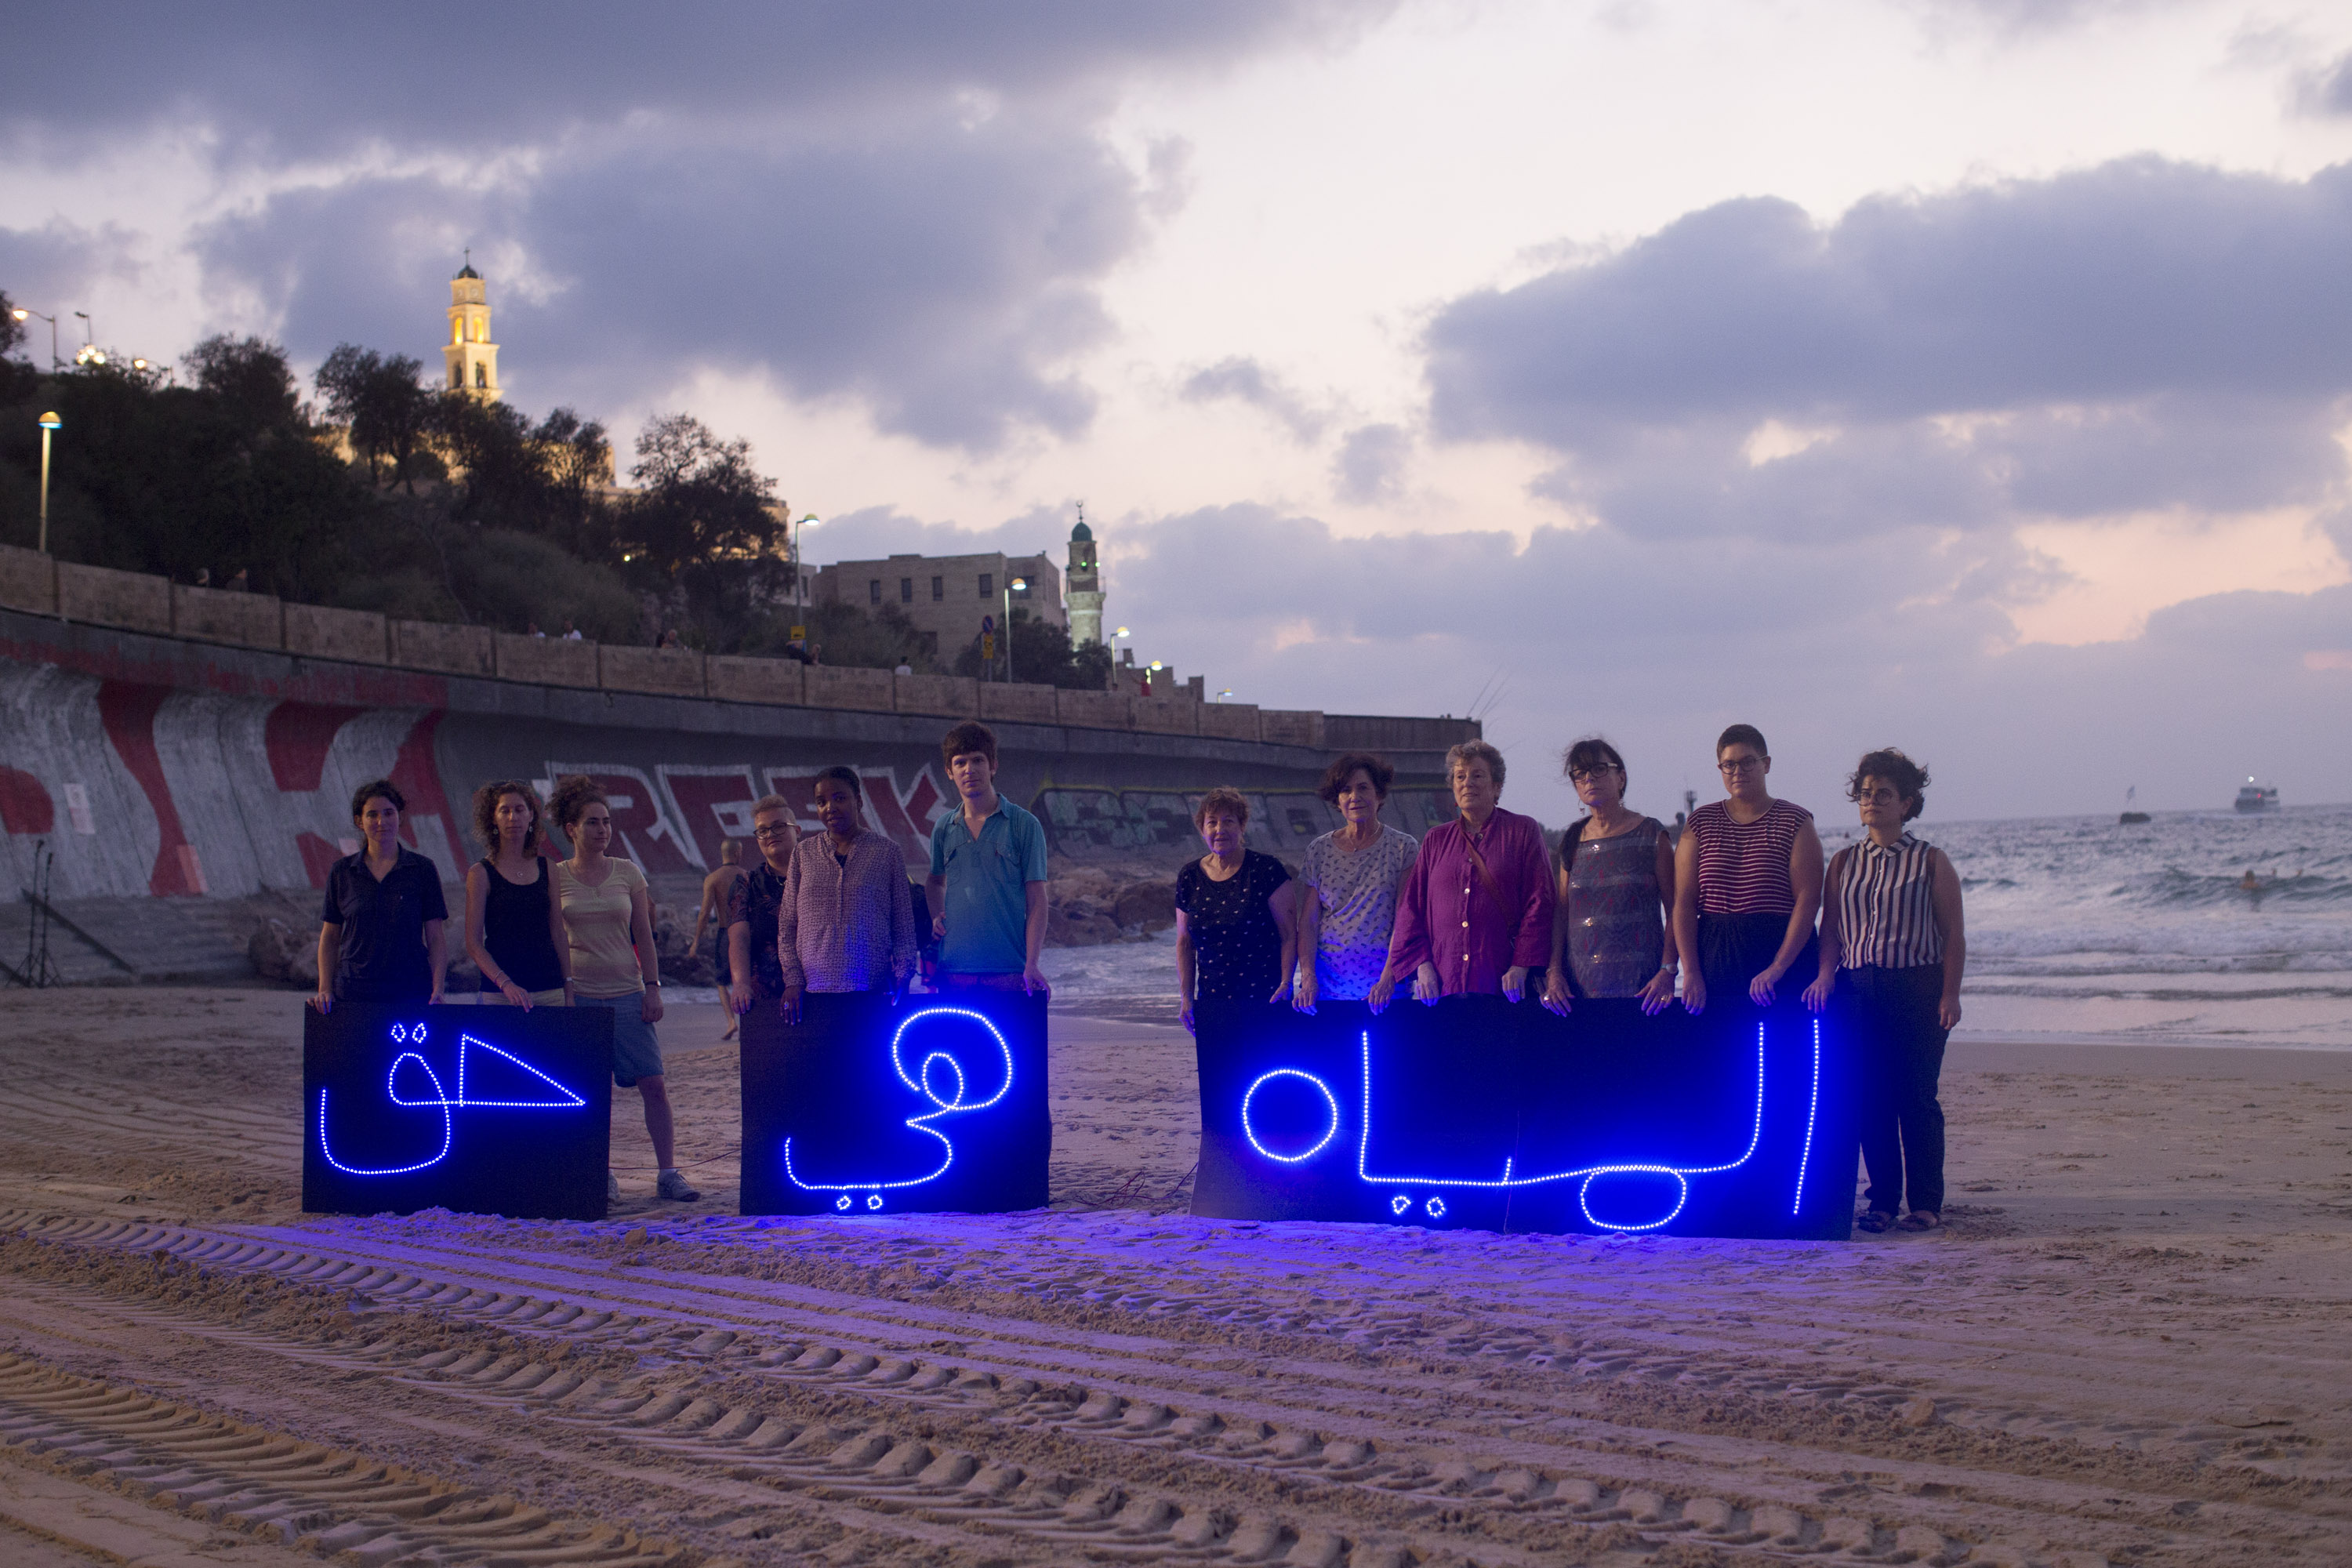 Activists hold illuminated Arabic letters that spell out "Water is a basic right" as part of an international light installation coordinated by the "Water Coalition," calling for equal water rights for Palestinians, August 14, 2016. (Oren Ziv/Activestills.org)